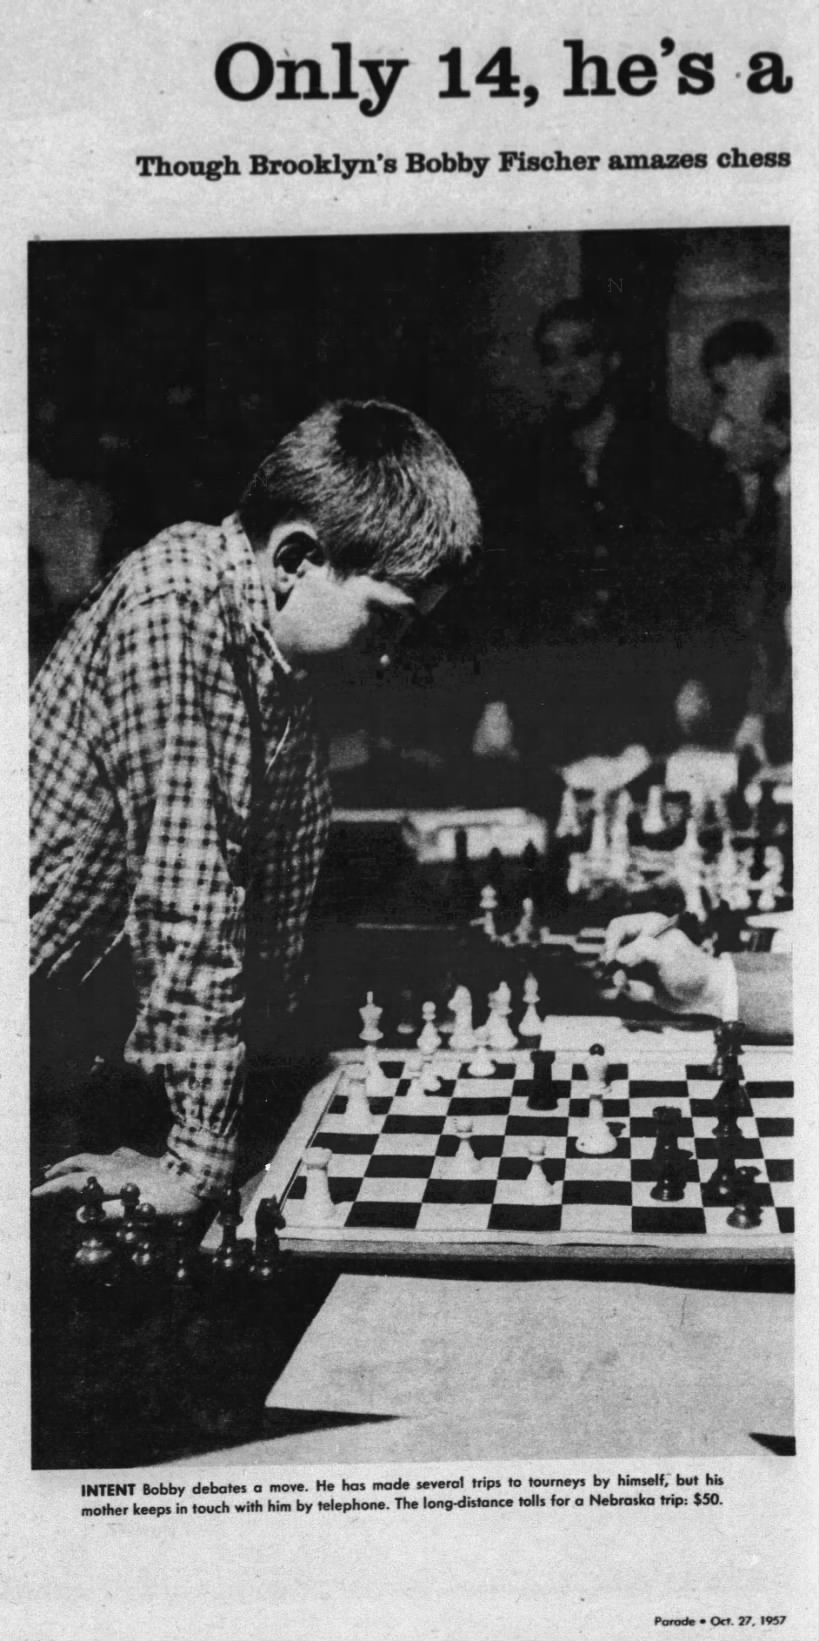 Only 14, he's a chess whiz (Column 1)